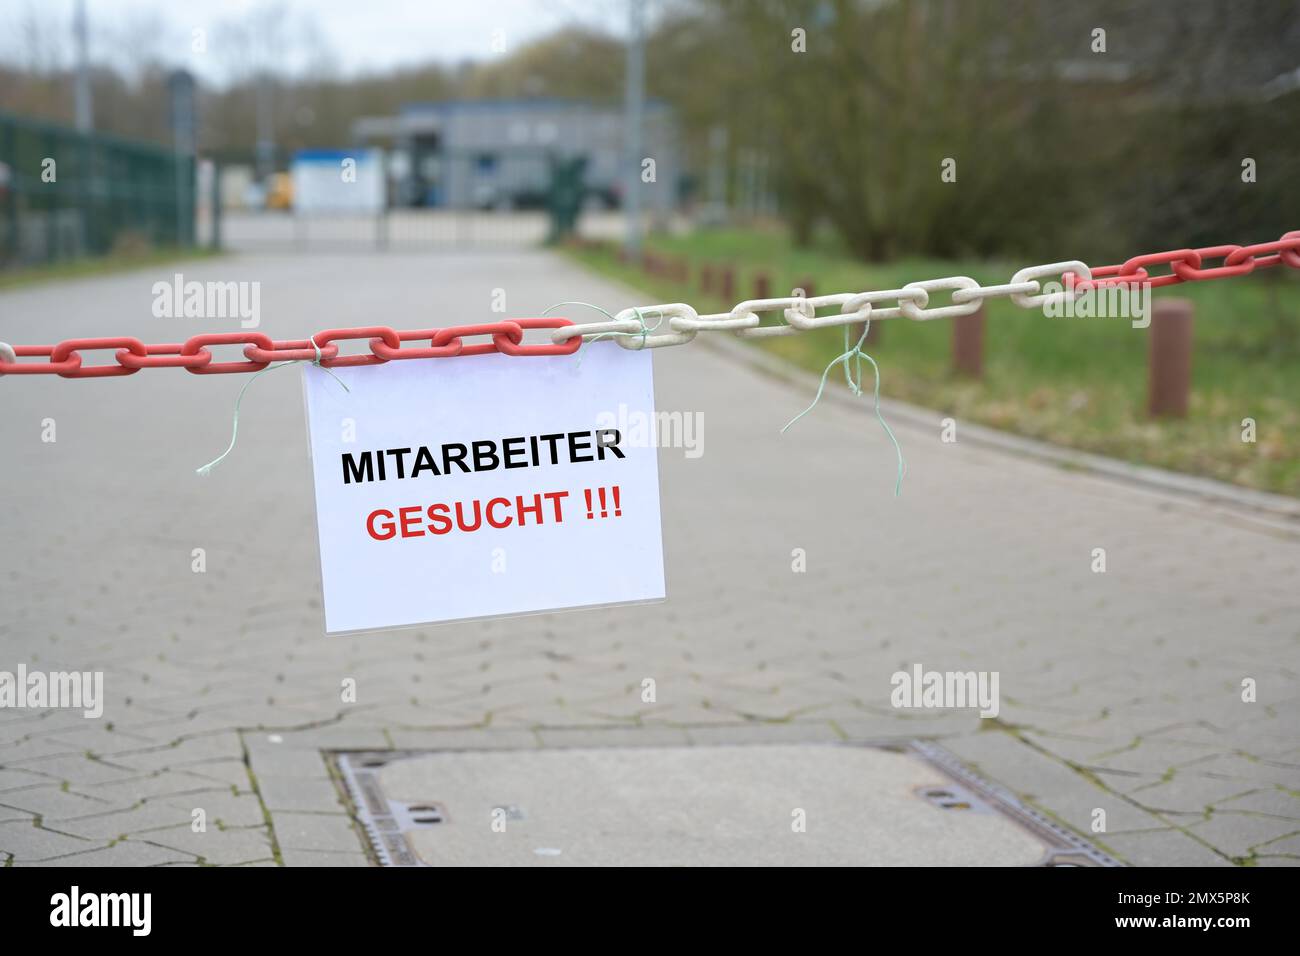 Sign at the entrance of a company with German text “Mitarbeiter gesucht”, meaning “Employees wanted”, concept for increasing shortage of workers due t Stock Photo